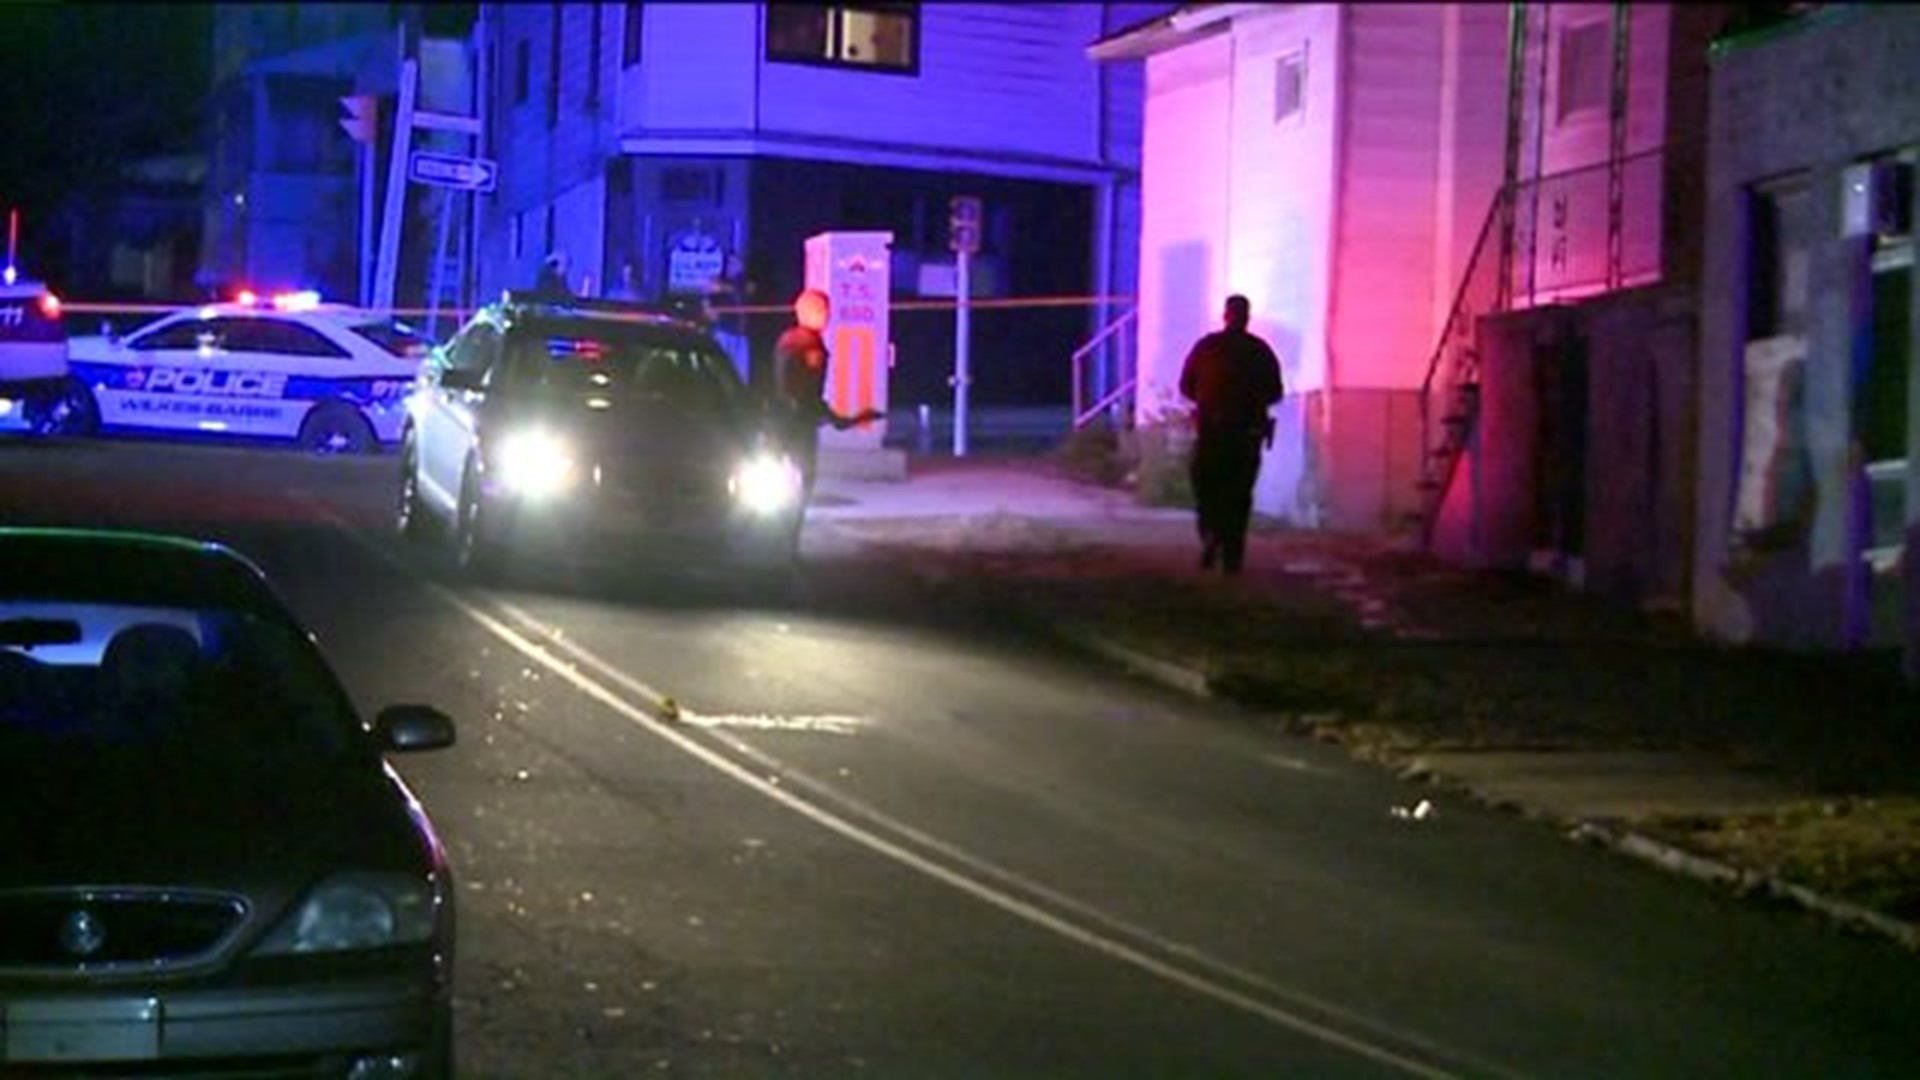 Police Investigate Shots Fired in Wilkes-Barre